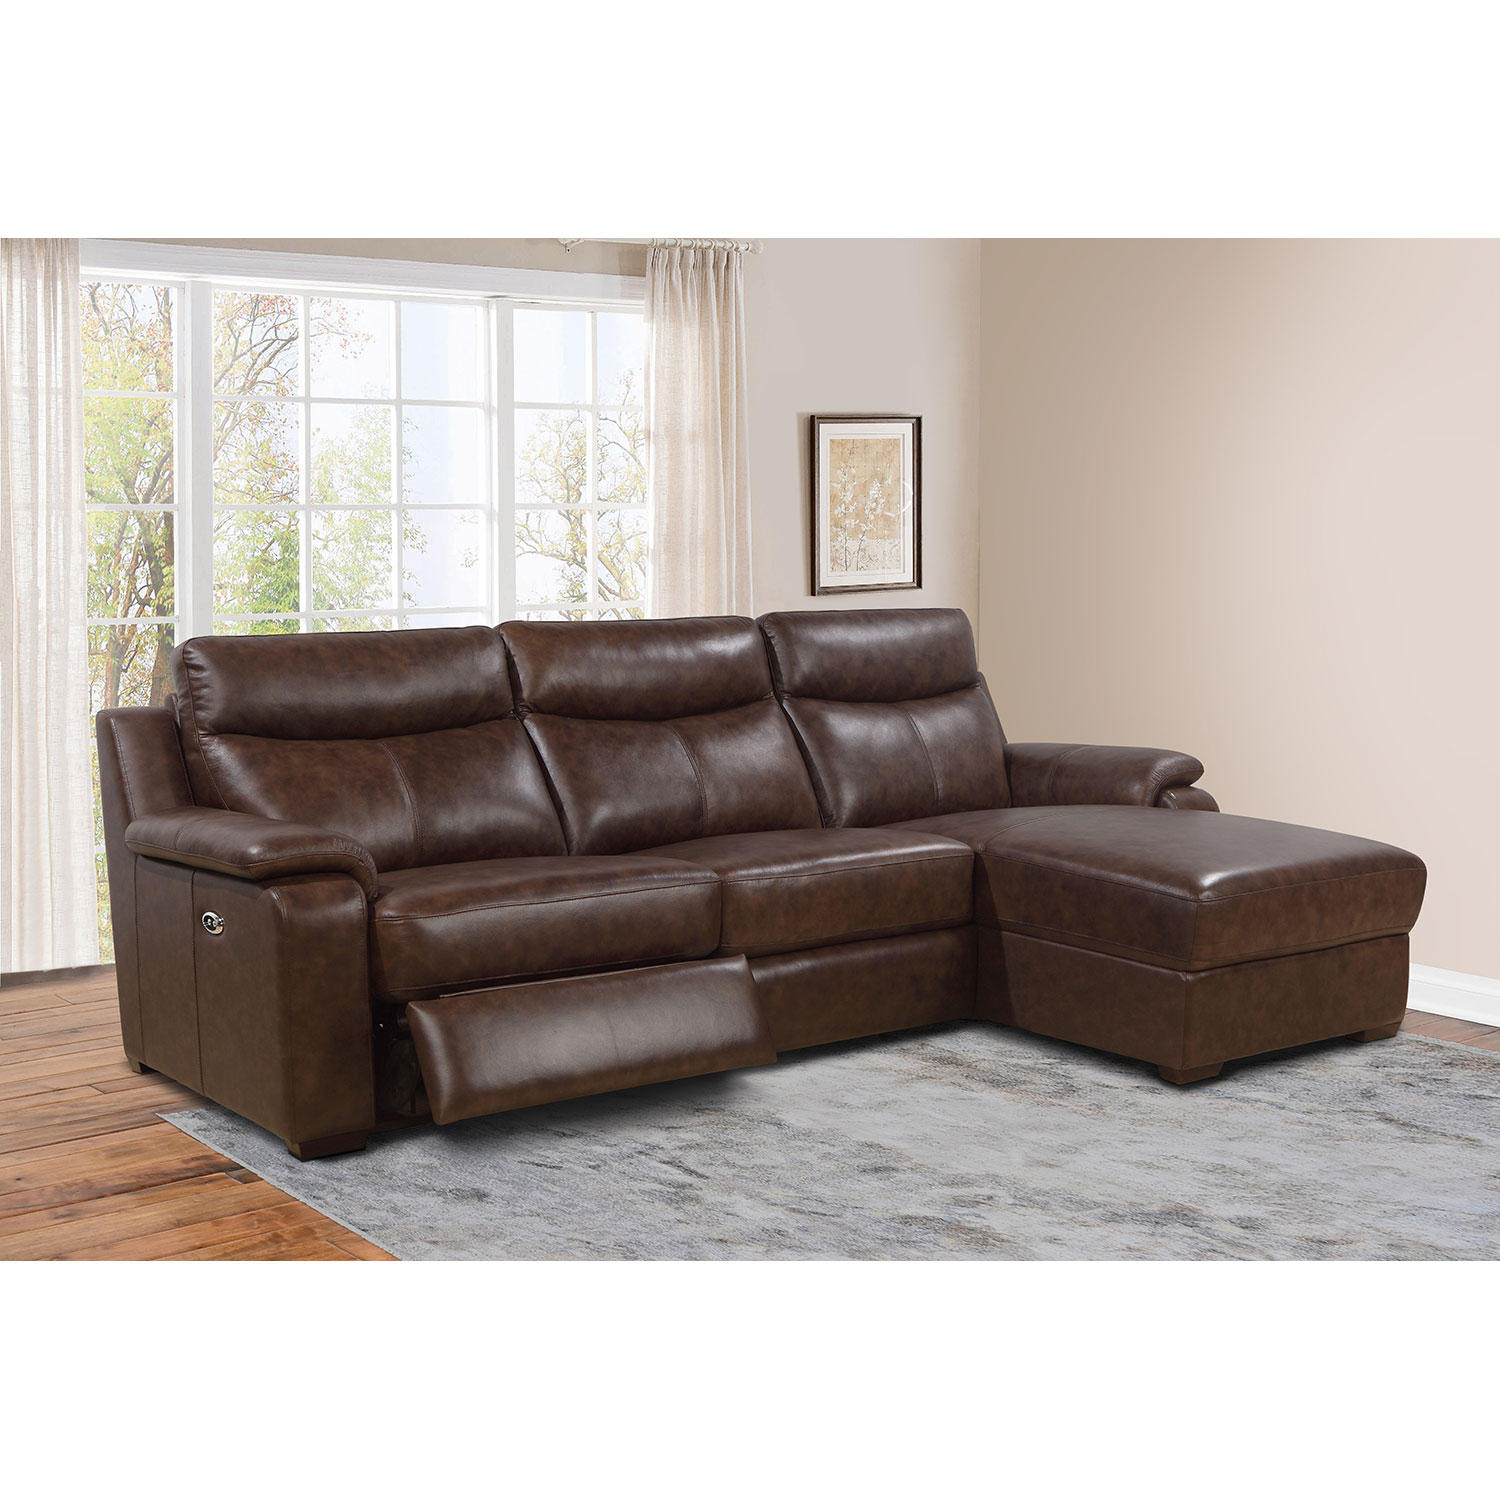 Nico Top-Grain Leather Power Reclining Sectional Sofa with Chaise